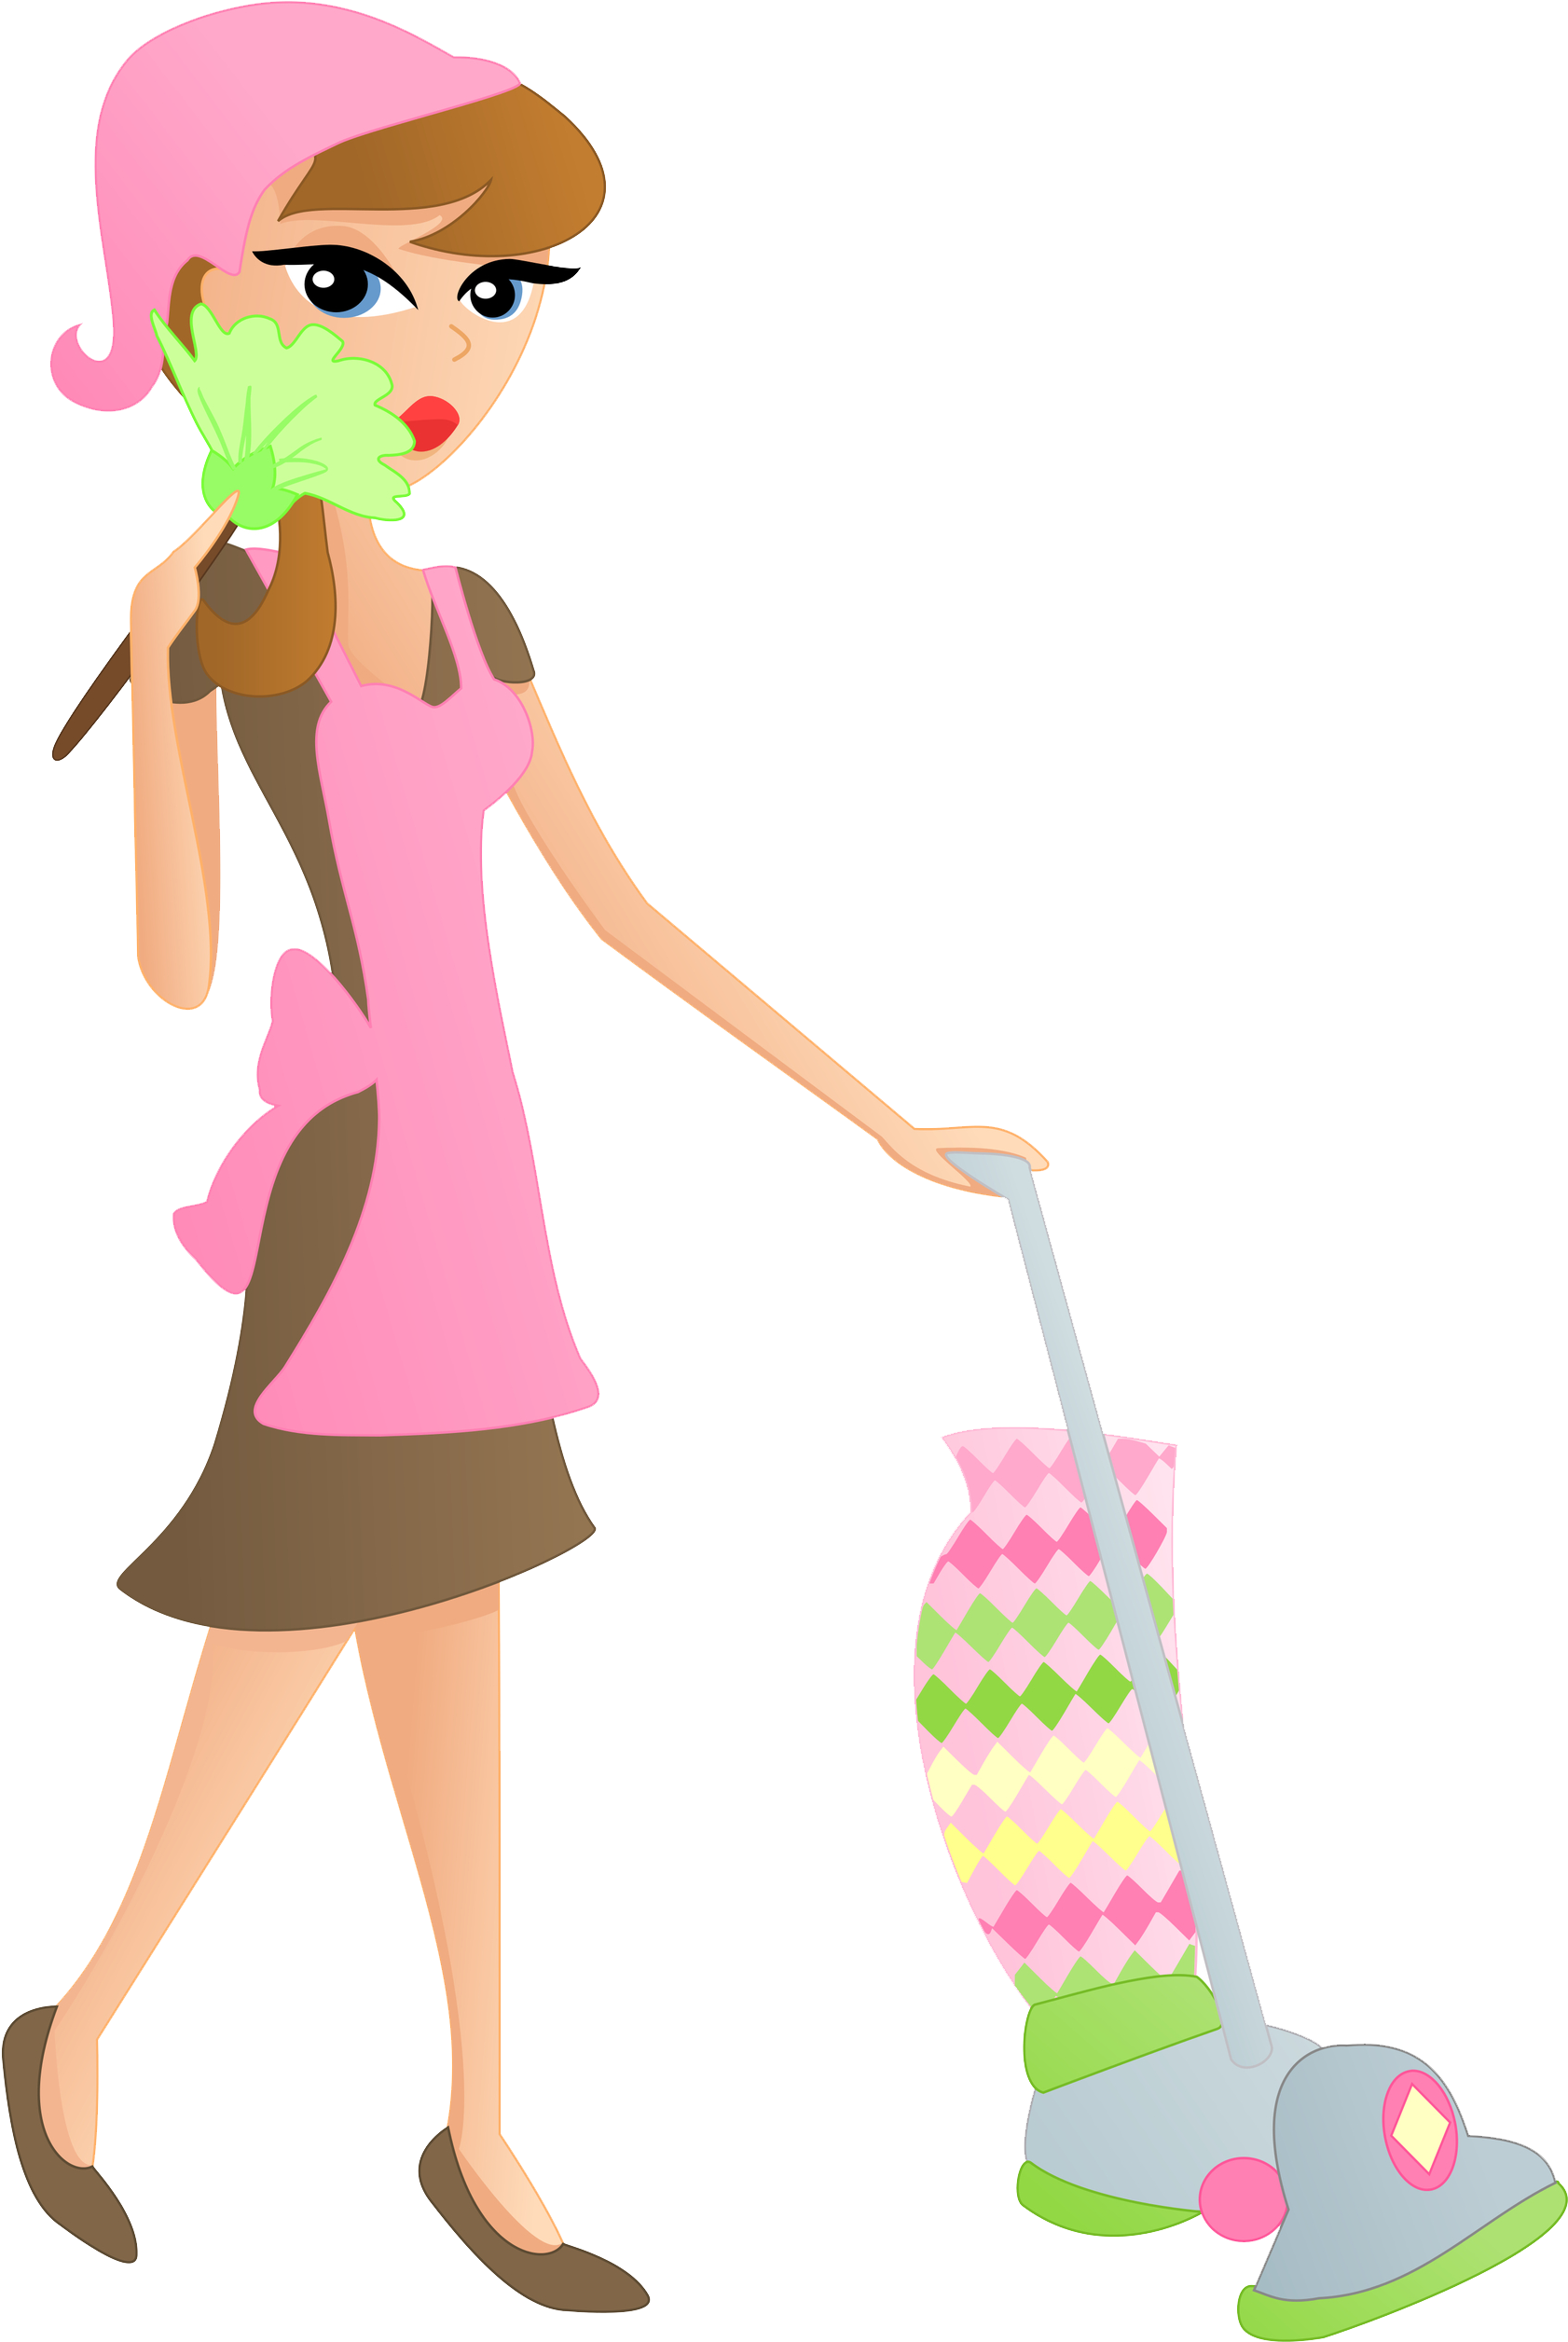 Cleaner Cleaning Maid Service - Cleaning Lady Png (1863x2682)